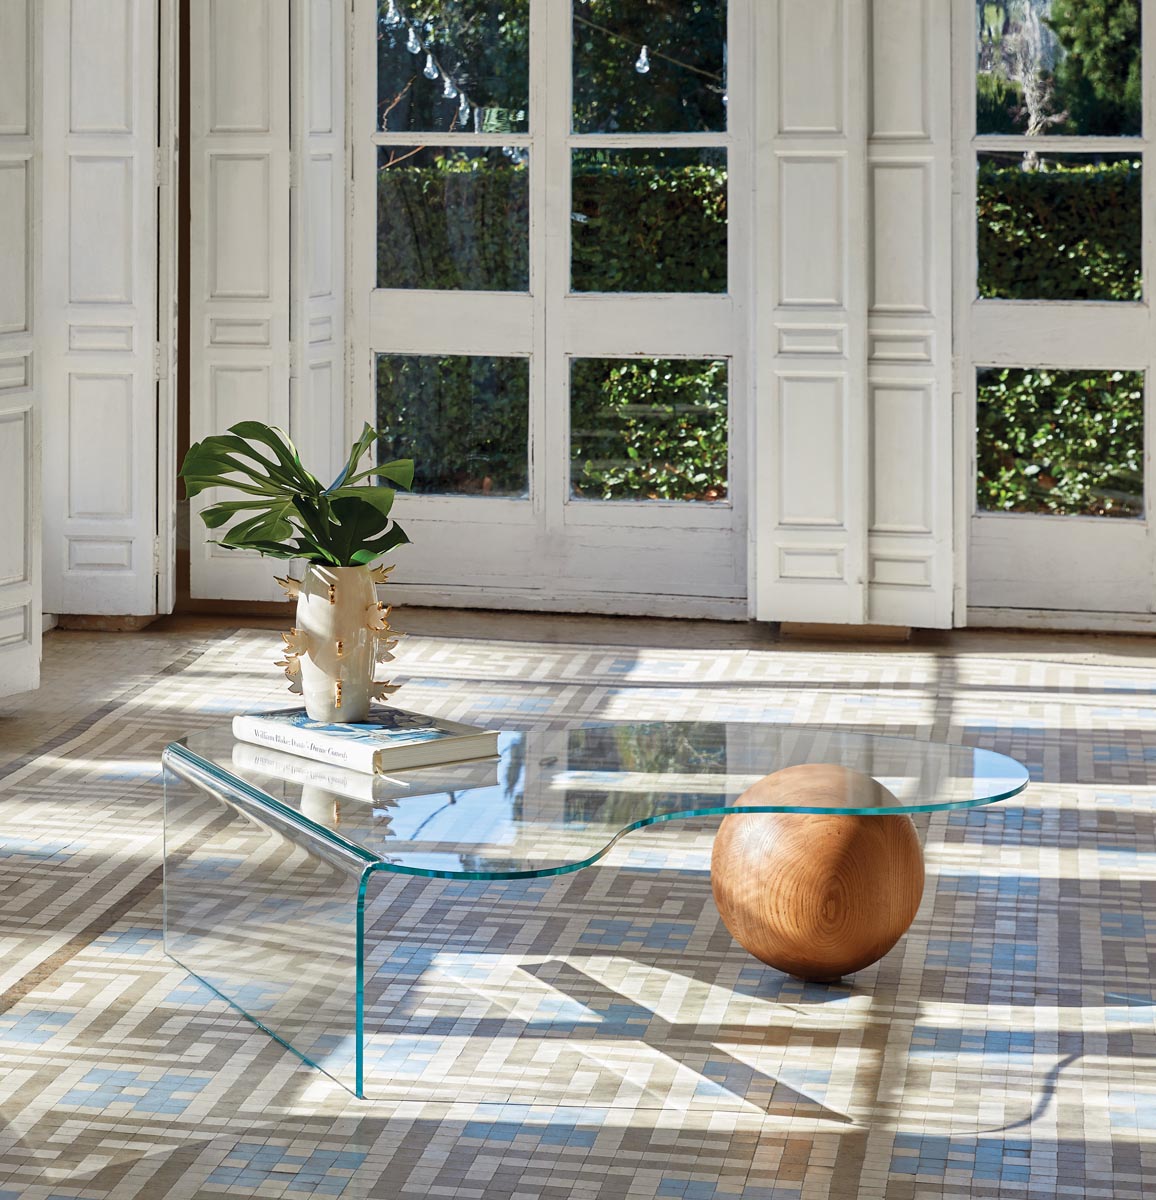 The GlobeWoo coffee table offers a pairing of glass and wood that’s both whimsical and elegant